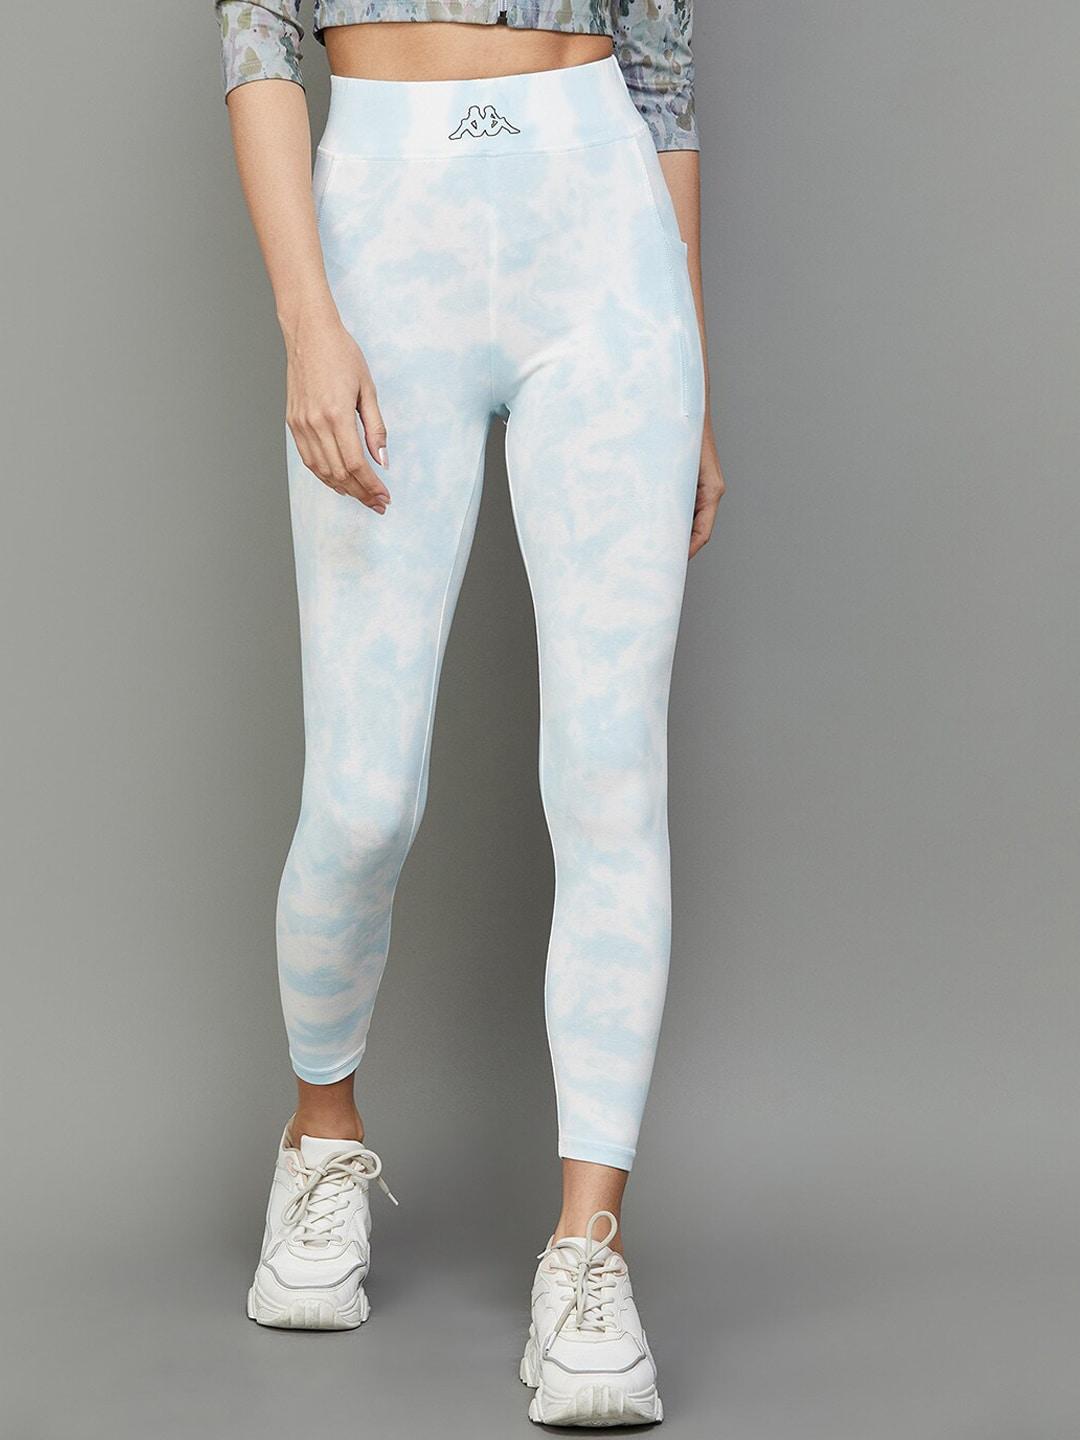 kappa-women-abstract-printed-slim-fit-ankle-length-sports-tights